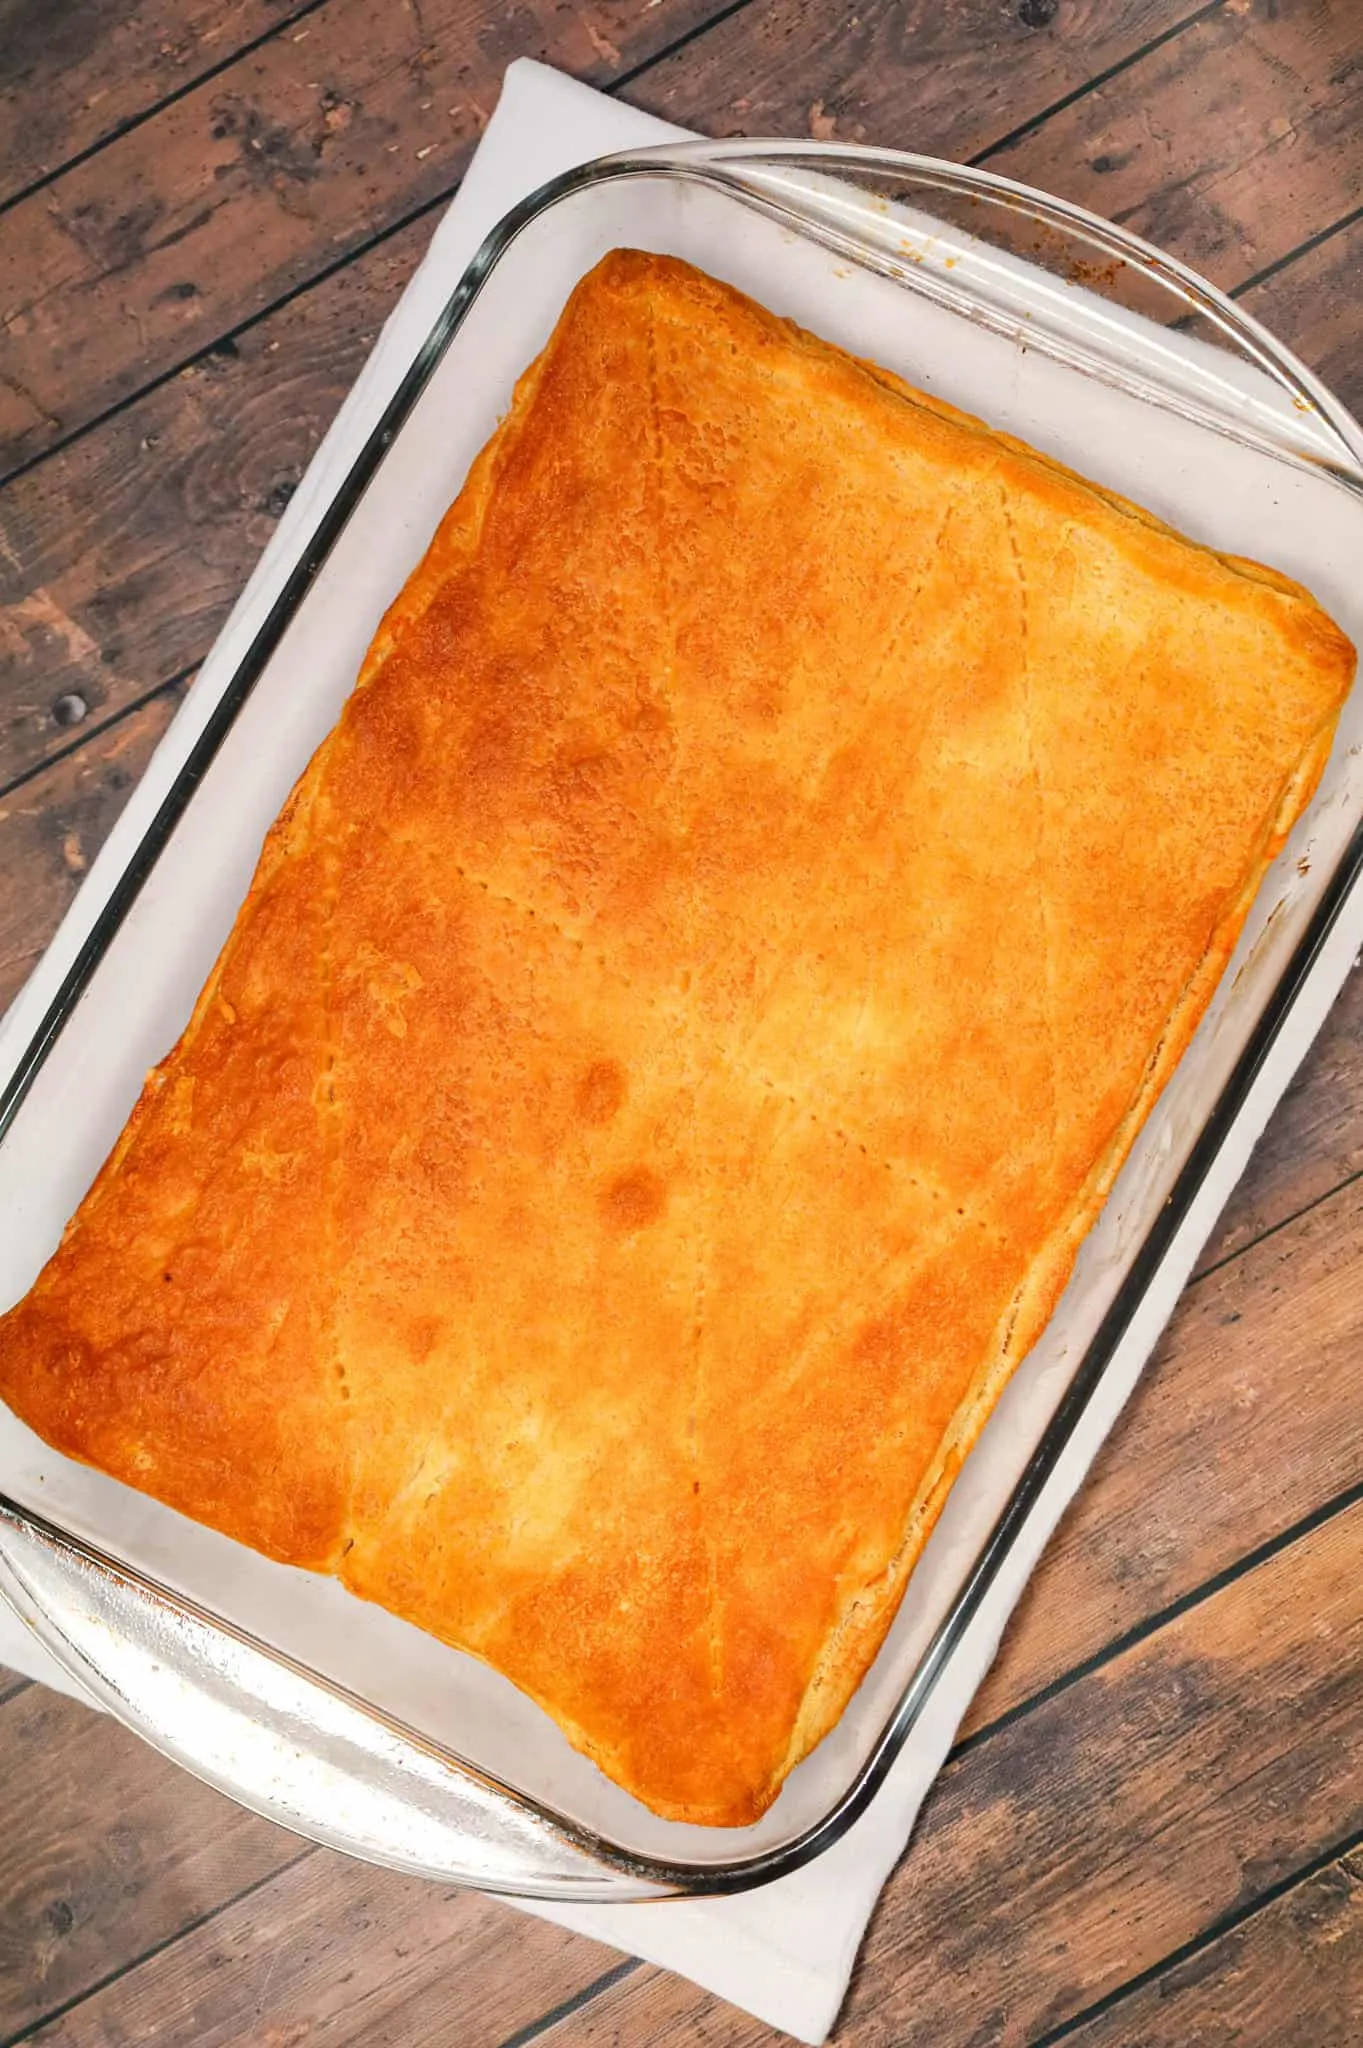 Sausage Cream Cheese Casserole is a delicious breakfast casserole loaded with pork sausage meat, cream cheese, maple syrup, cheddar cheese and green onions all baked between two layers of Pillsbury crescent rolls.